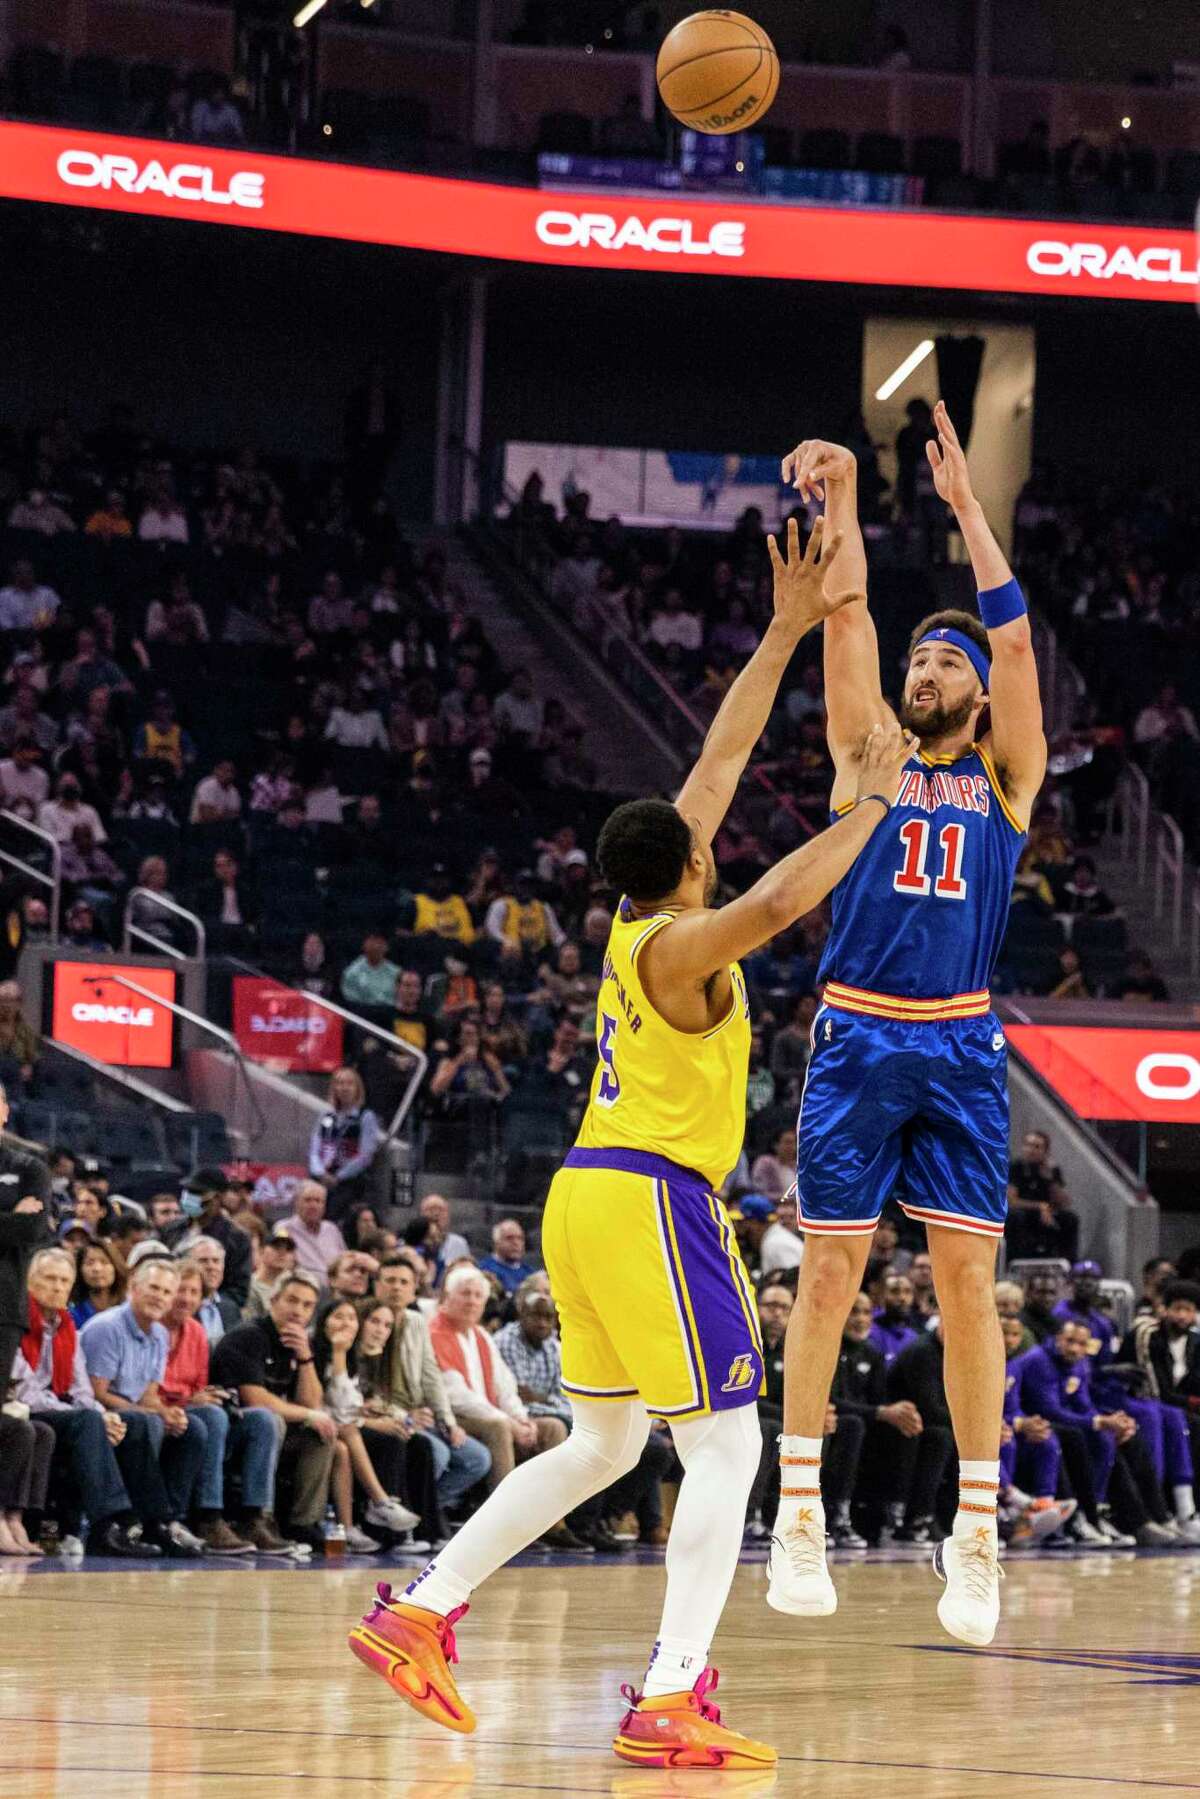 Golden State Warriors guard Klay Thompson shoots a three-pointer during the first quarter of his NBA basketball game against Los Angeles Lakers in San Francisco, Calif. Thursday, April 7, 2022.